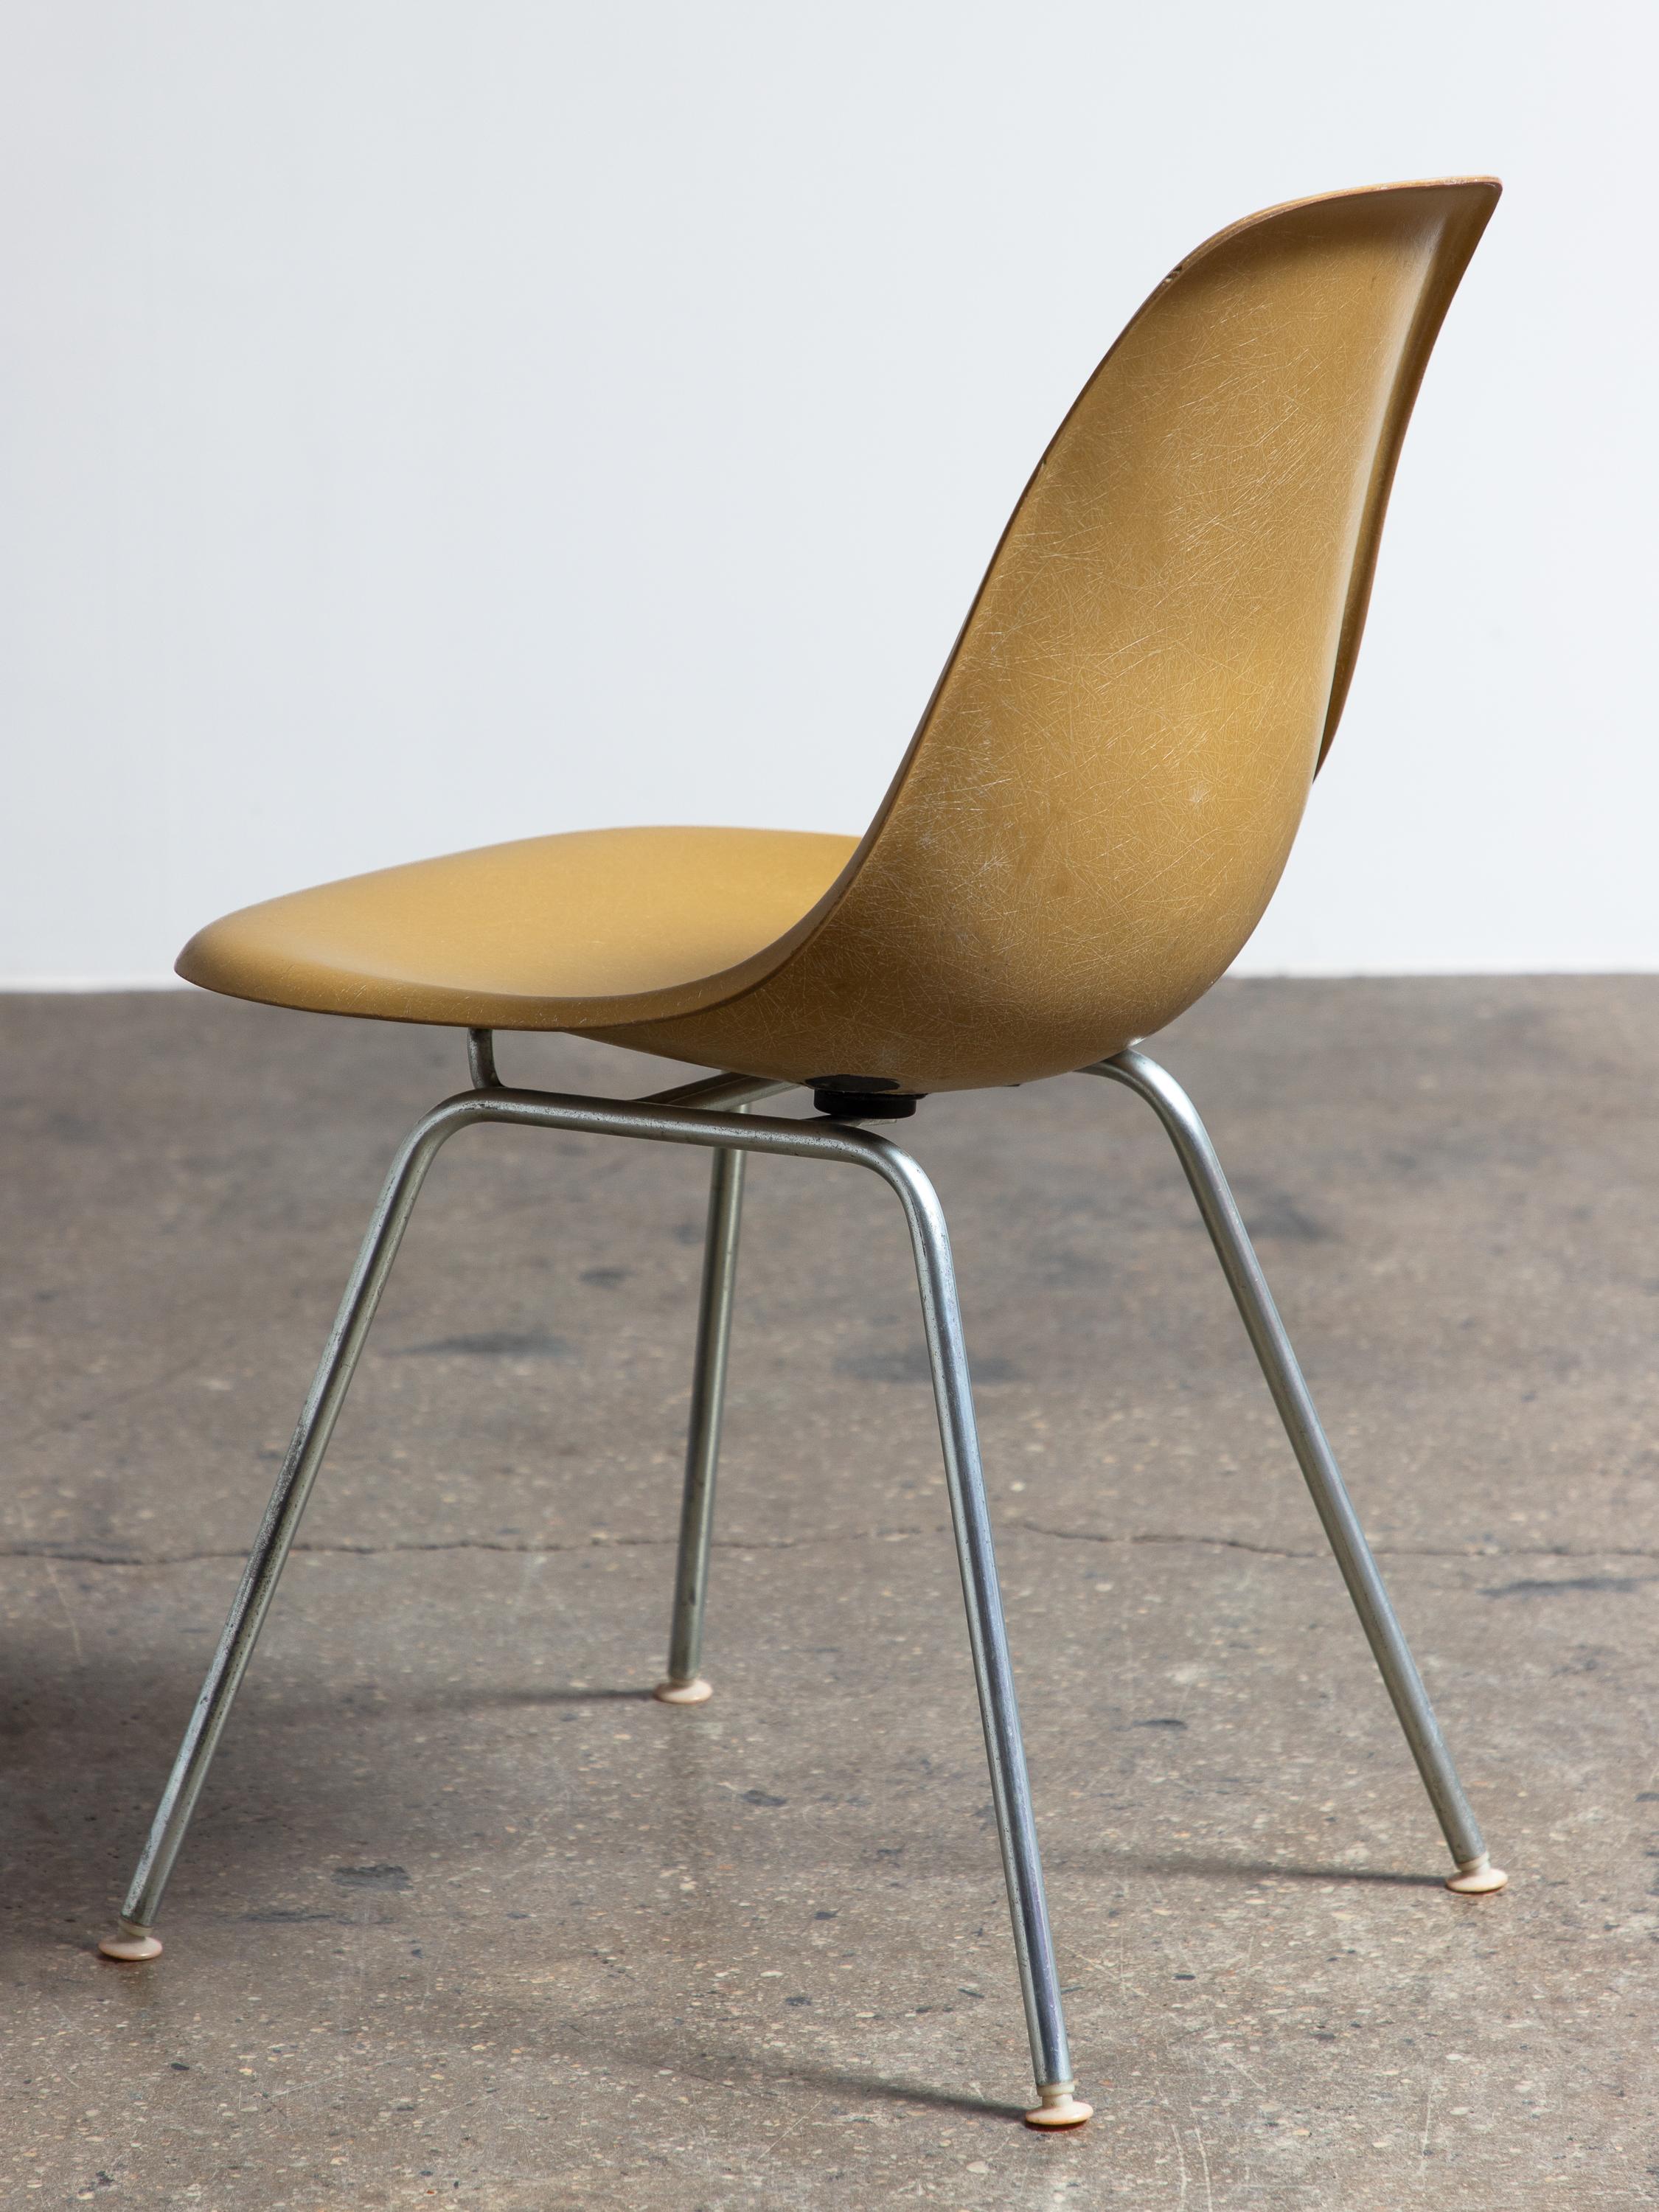 Ochre Yellow Eames for Herman Miller Vintage 1960s Fiberglass Shell Chairs In Good Condition For Sale In Brooklyn, NY